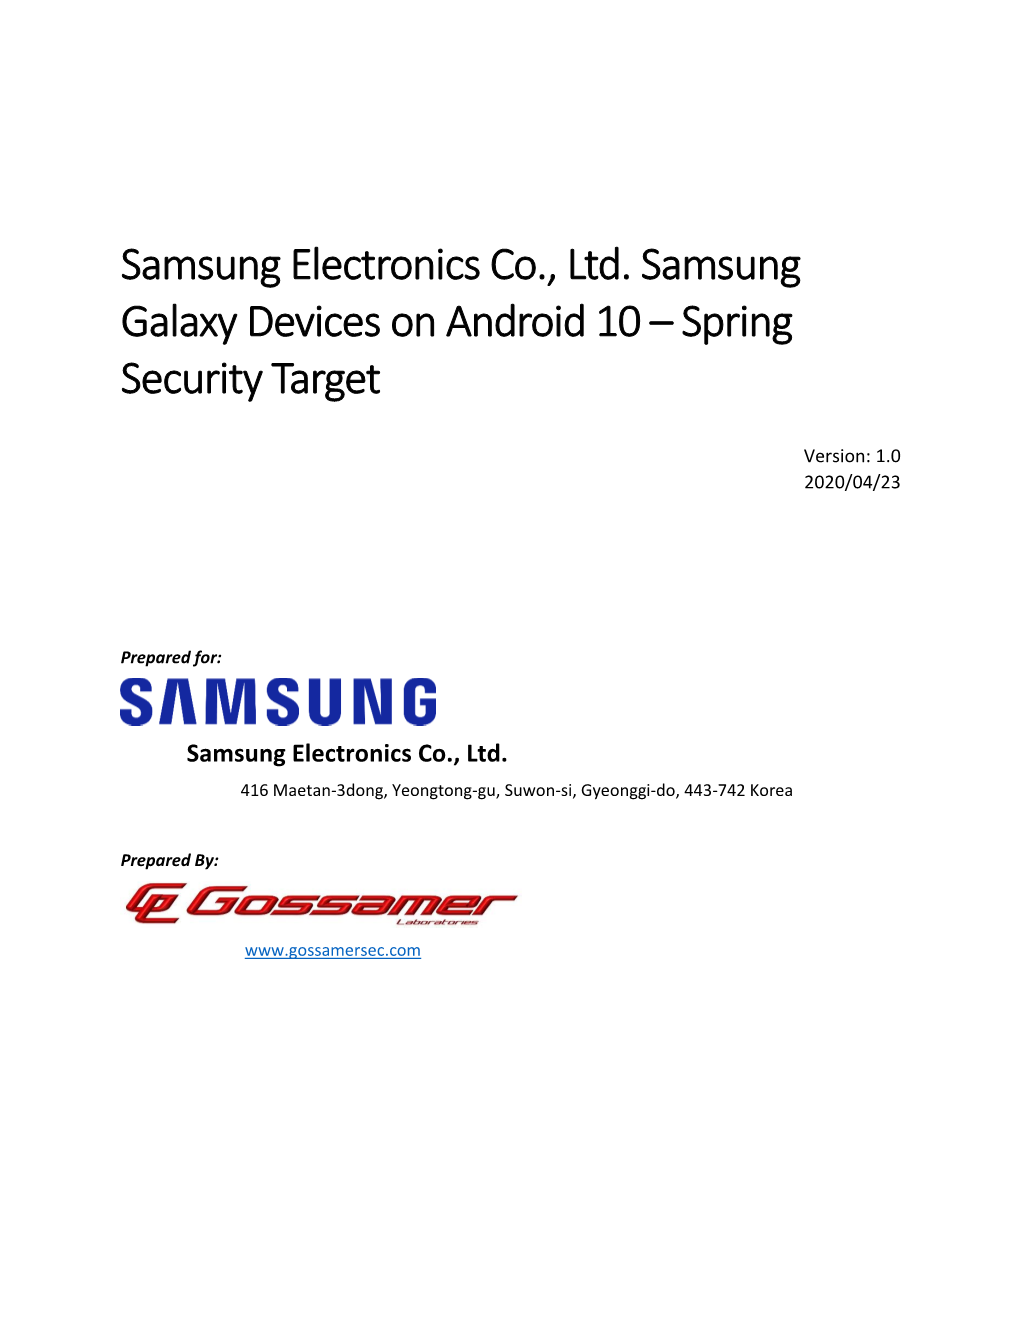 Samsung Electronics Co., Ltd. Samsung Galaxy Devices on Android 10 – Spring Security Target